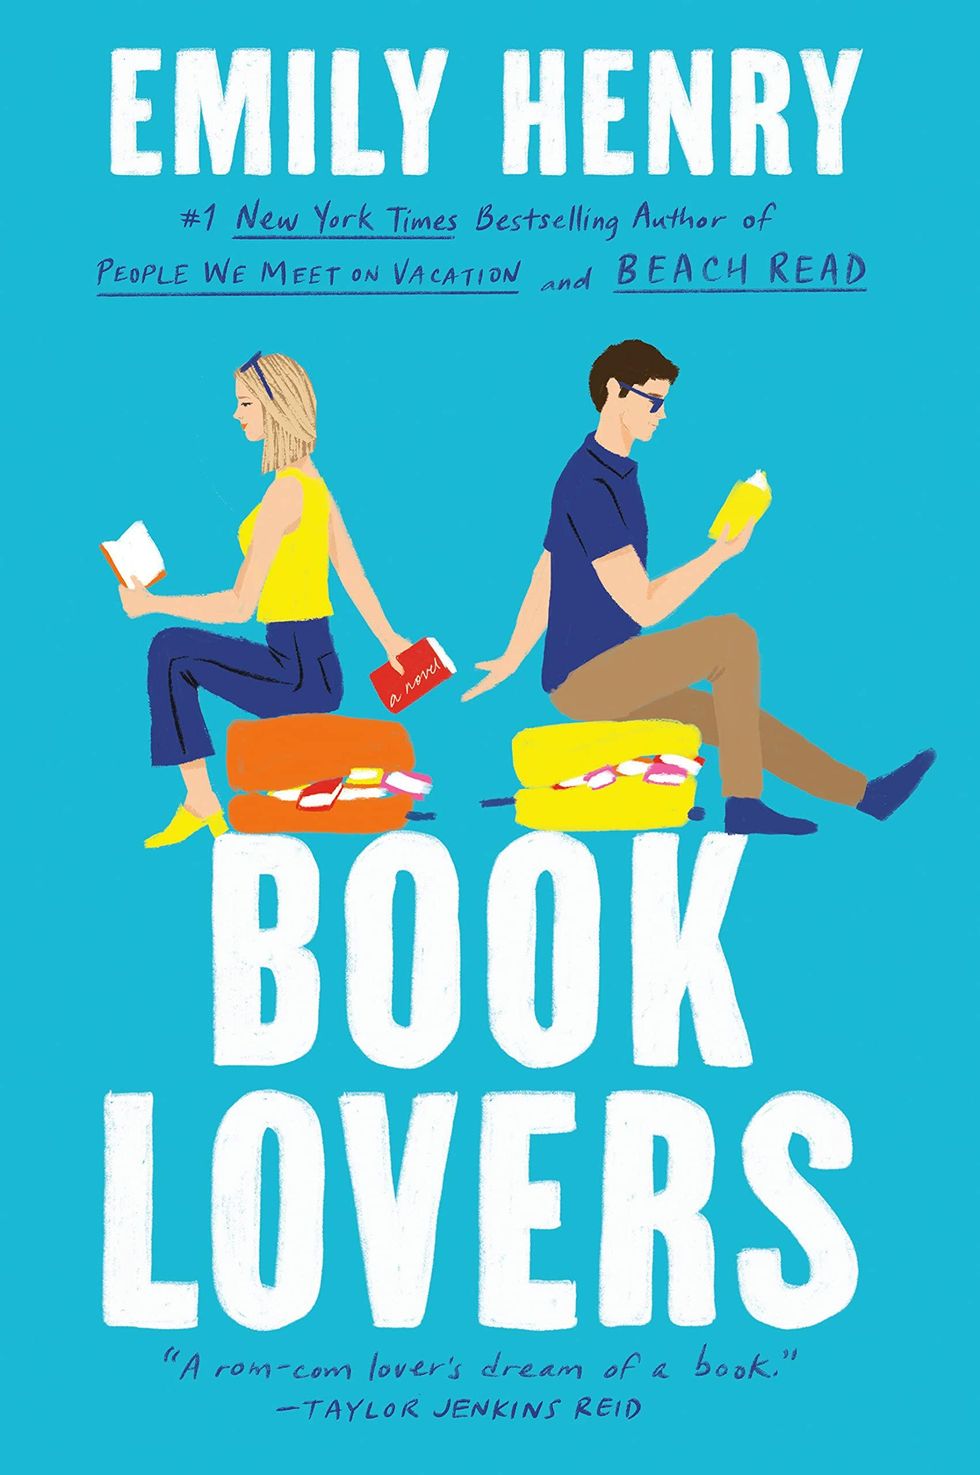 Book Lovers by Emily Henry BookTok Books